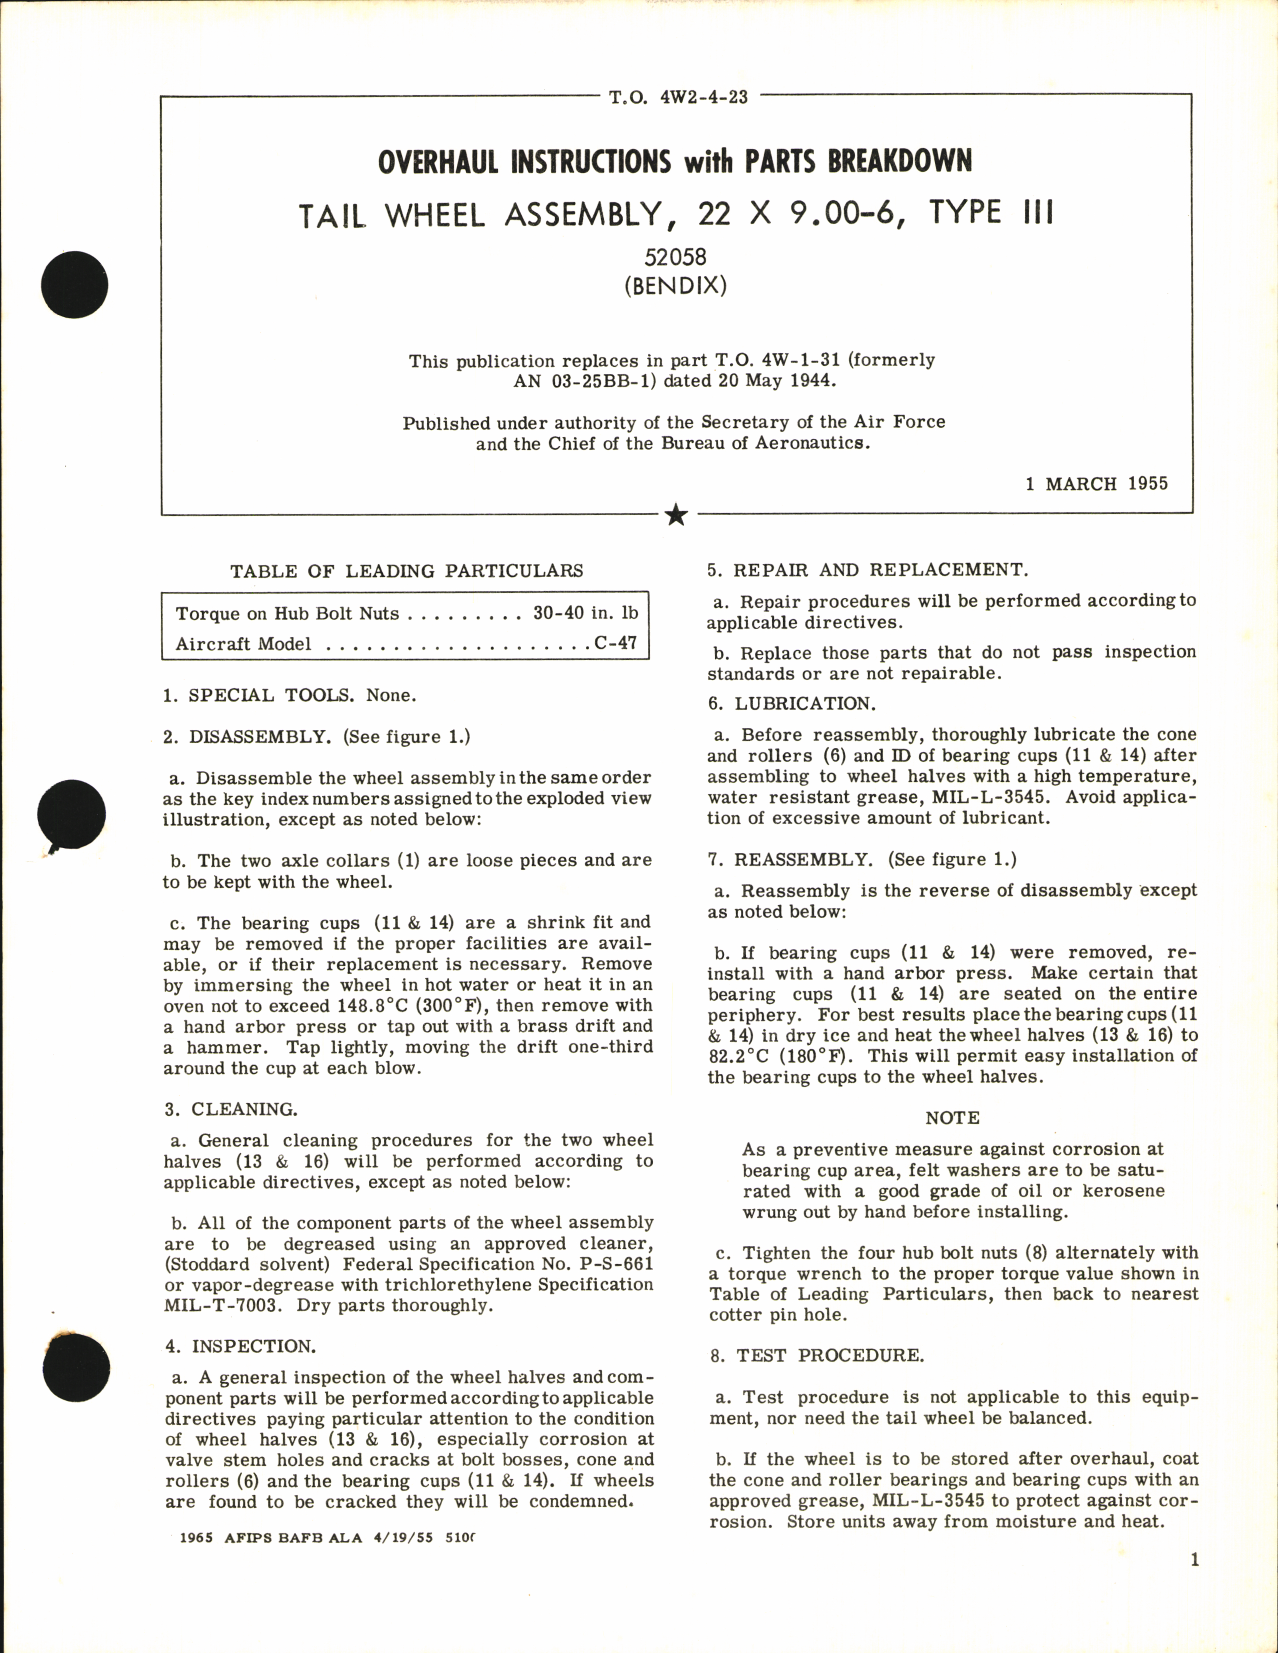 Sample page 1 from AirCorps Library document: Overhaul Instructions with Parts Breakdown for Tail Wheel Assembly 22 x 9.00-6, Type III